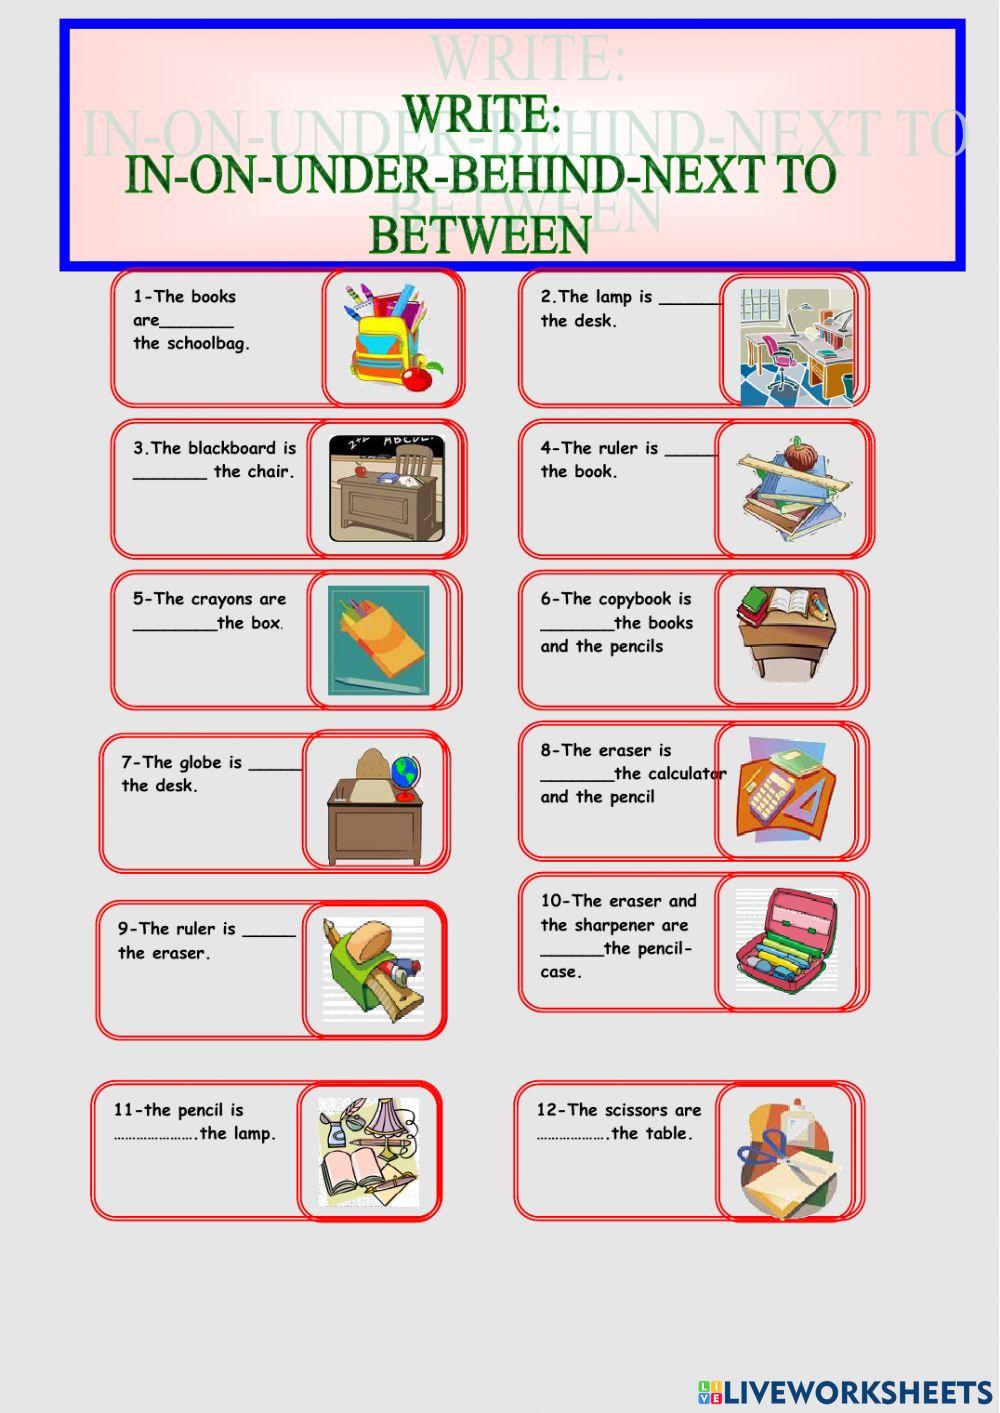 Prepositions online exercise for 3RD